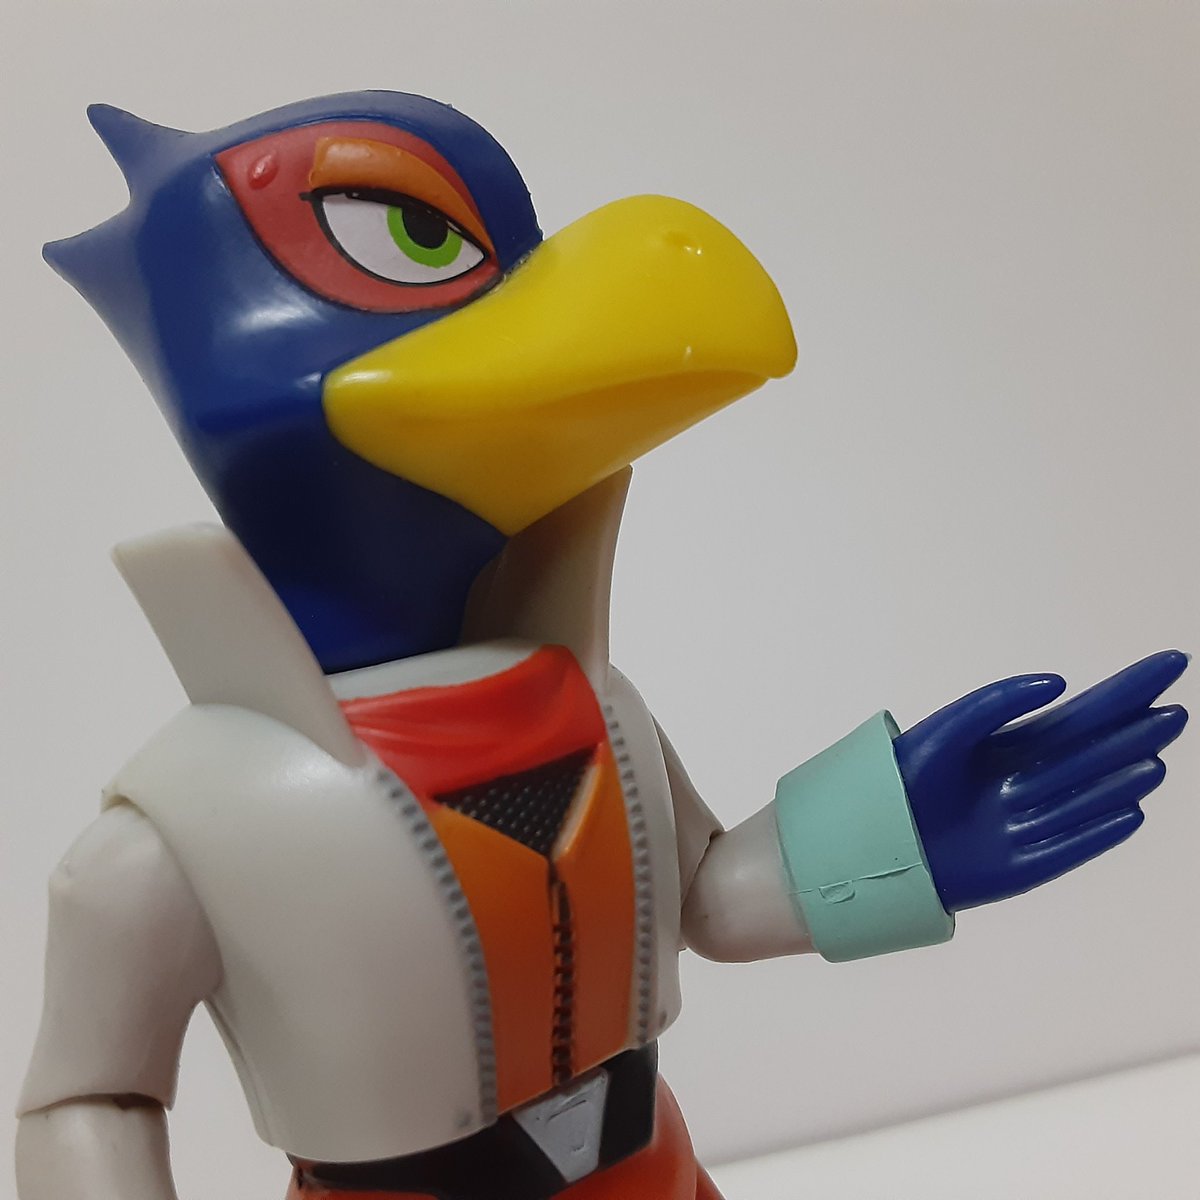 Its midnight!Time for  #Toytober 10-2!World of Nintendo 4' Star Fox Falco Lombardi (2015)This Jakks Pacific figure of the S-Tier Melee staple was so hard to come by for a while for me. Em was able to snag it for my birthday one year when it was weirdly widely available again.